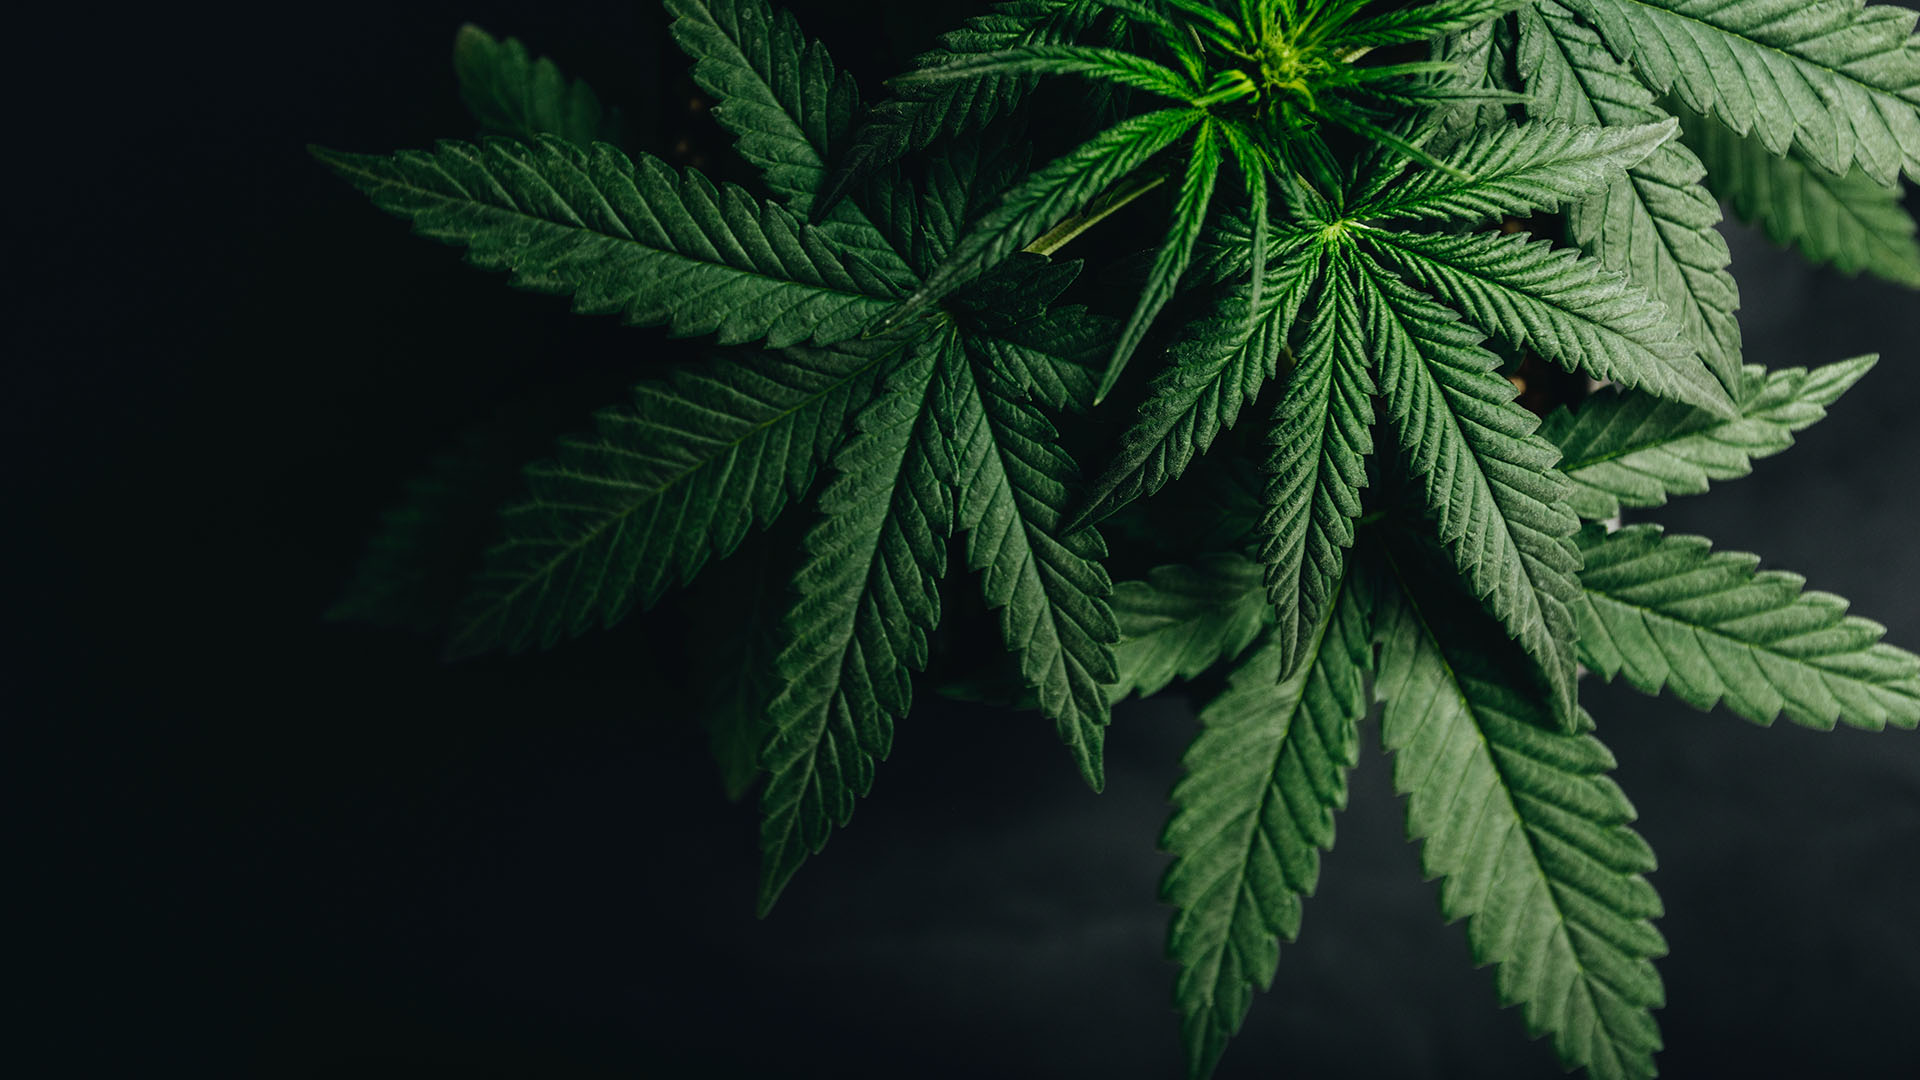 The Sativa Spectrum: US bankruptcy courts display increased willingness to entertain cannabis related bankruptcy filings